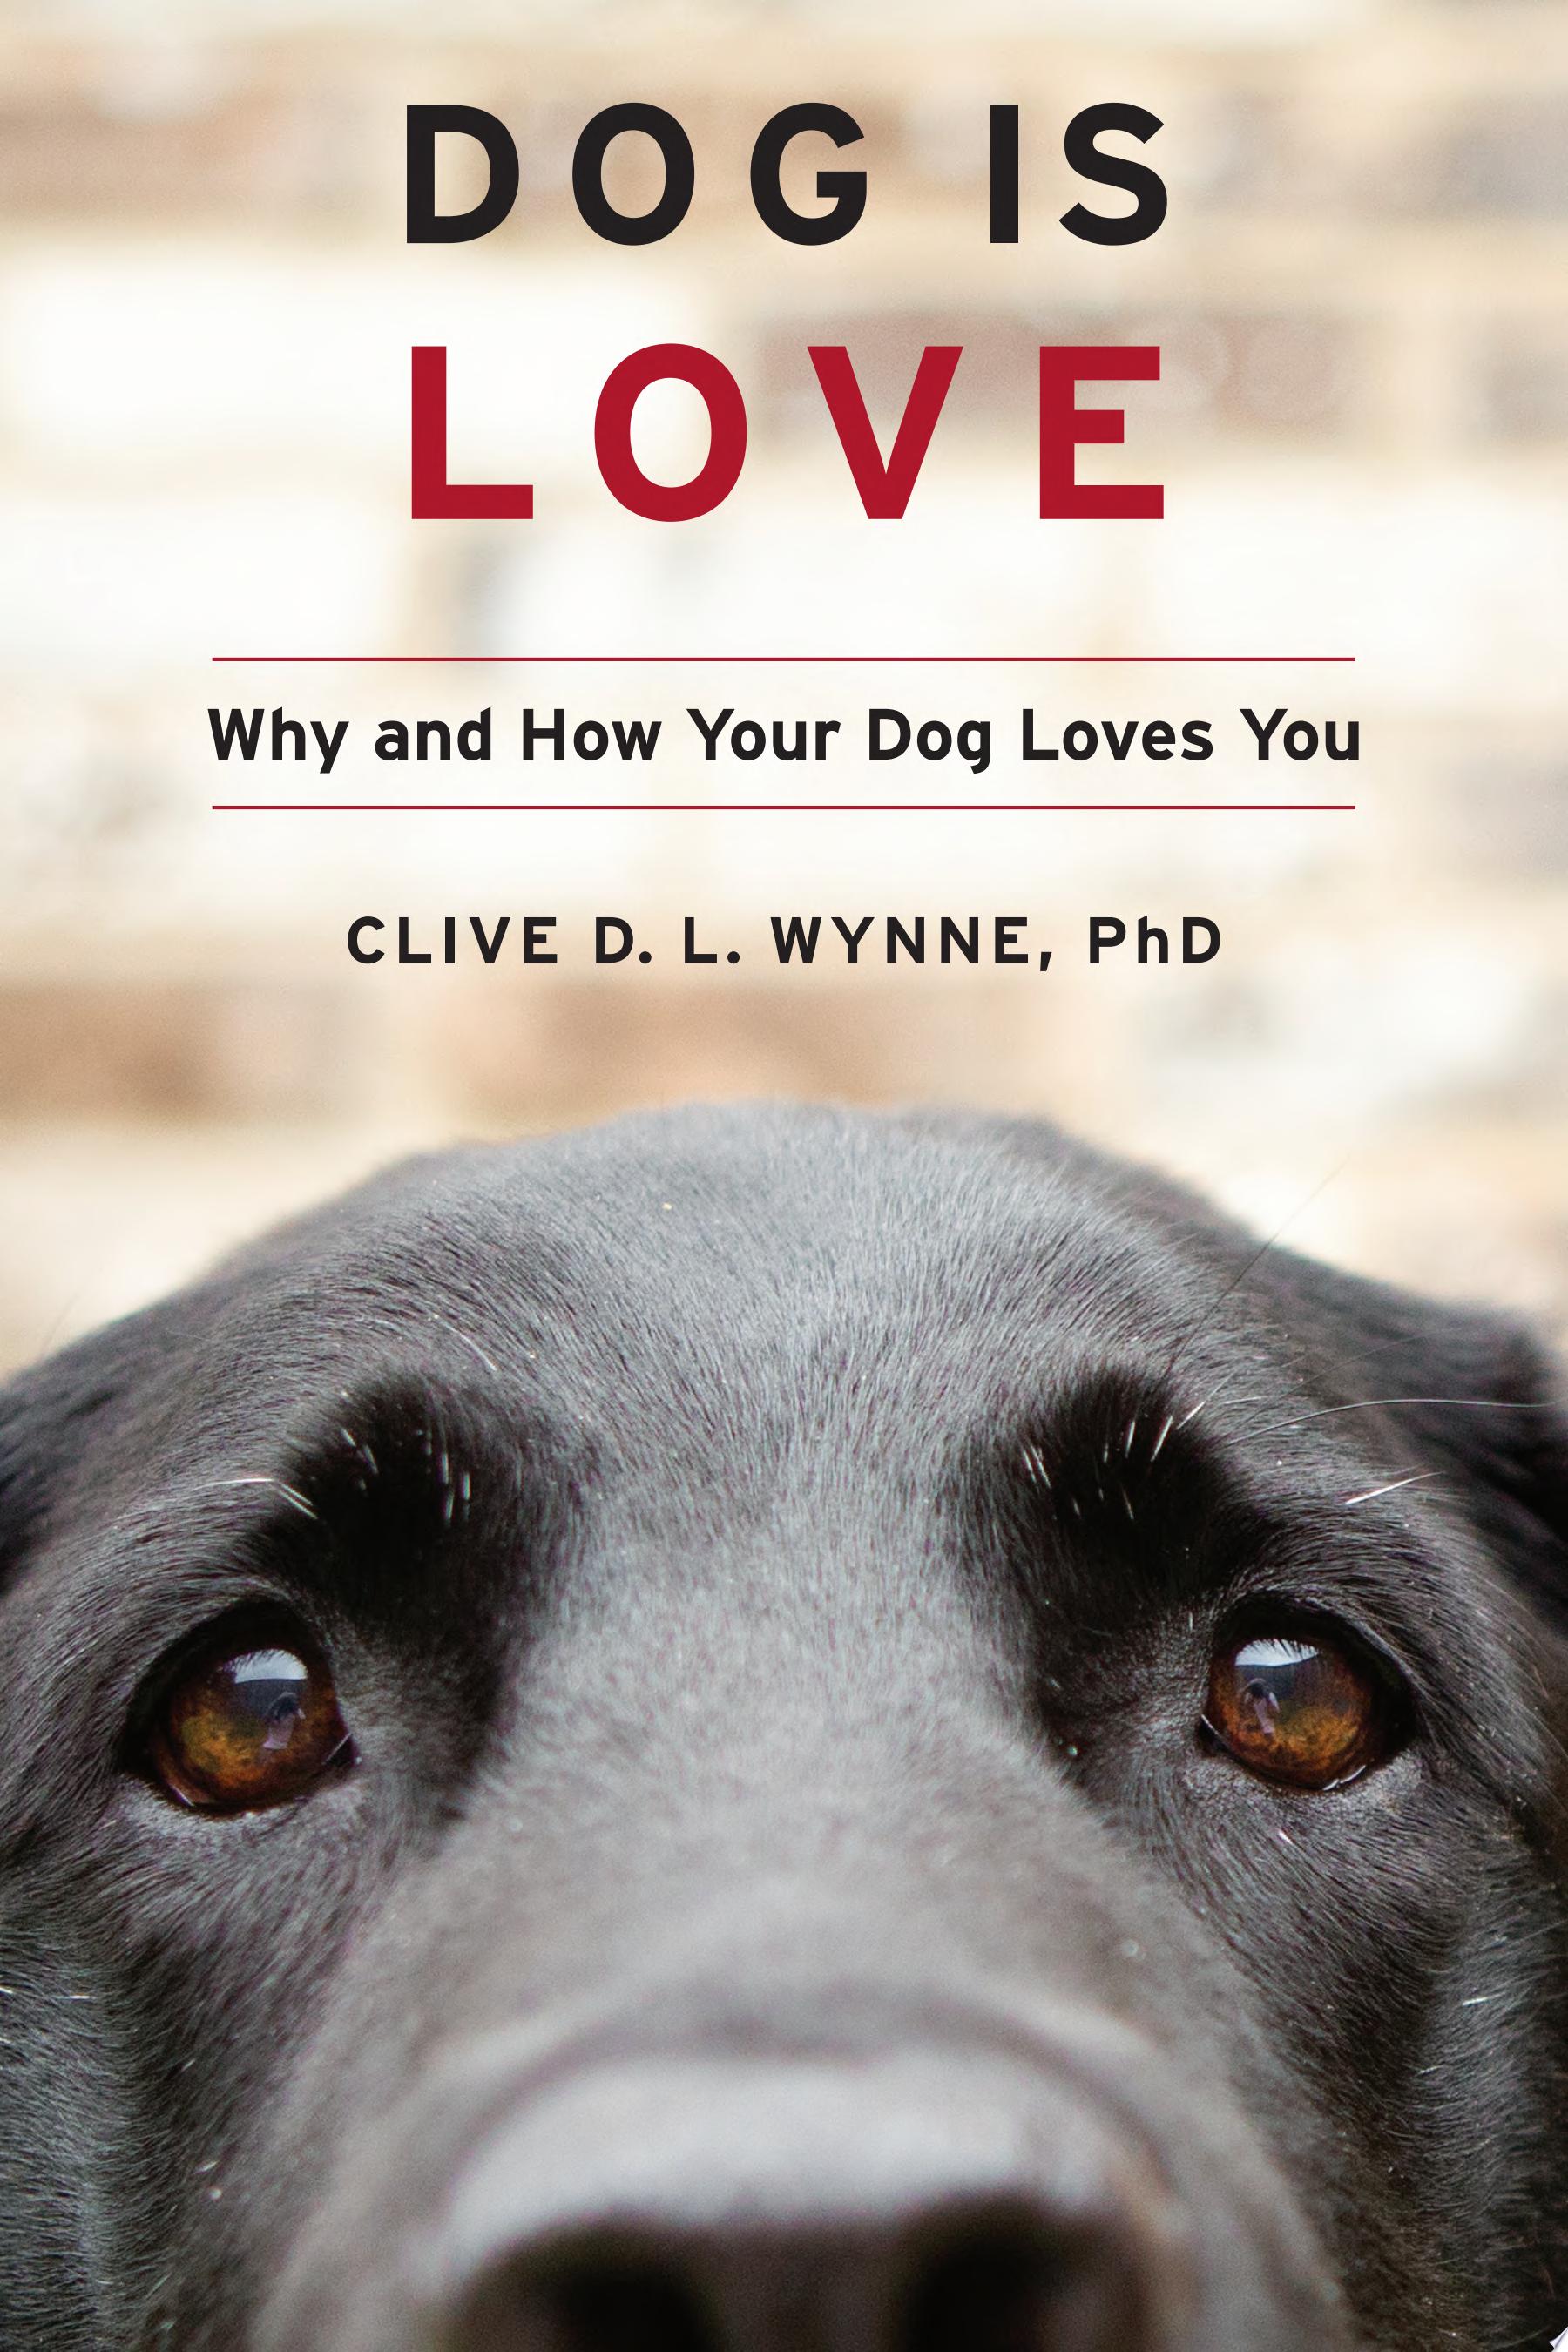 Image for "Dog Is Love"